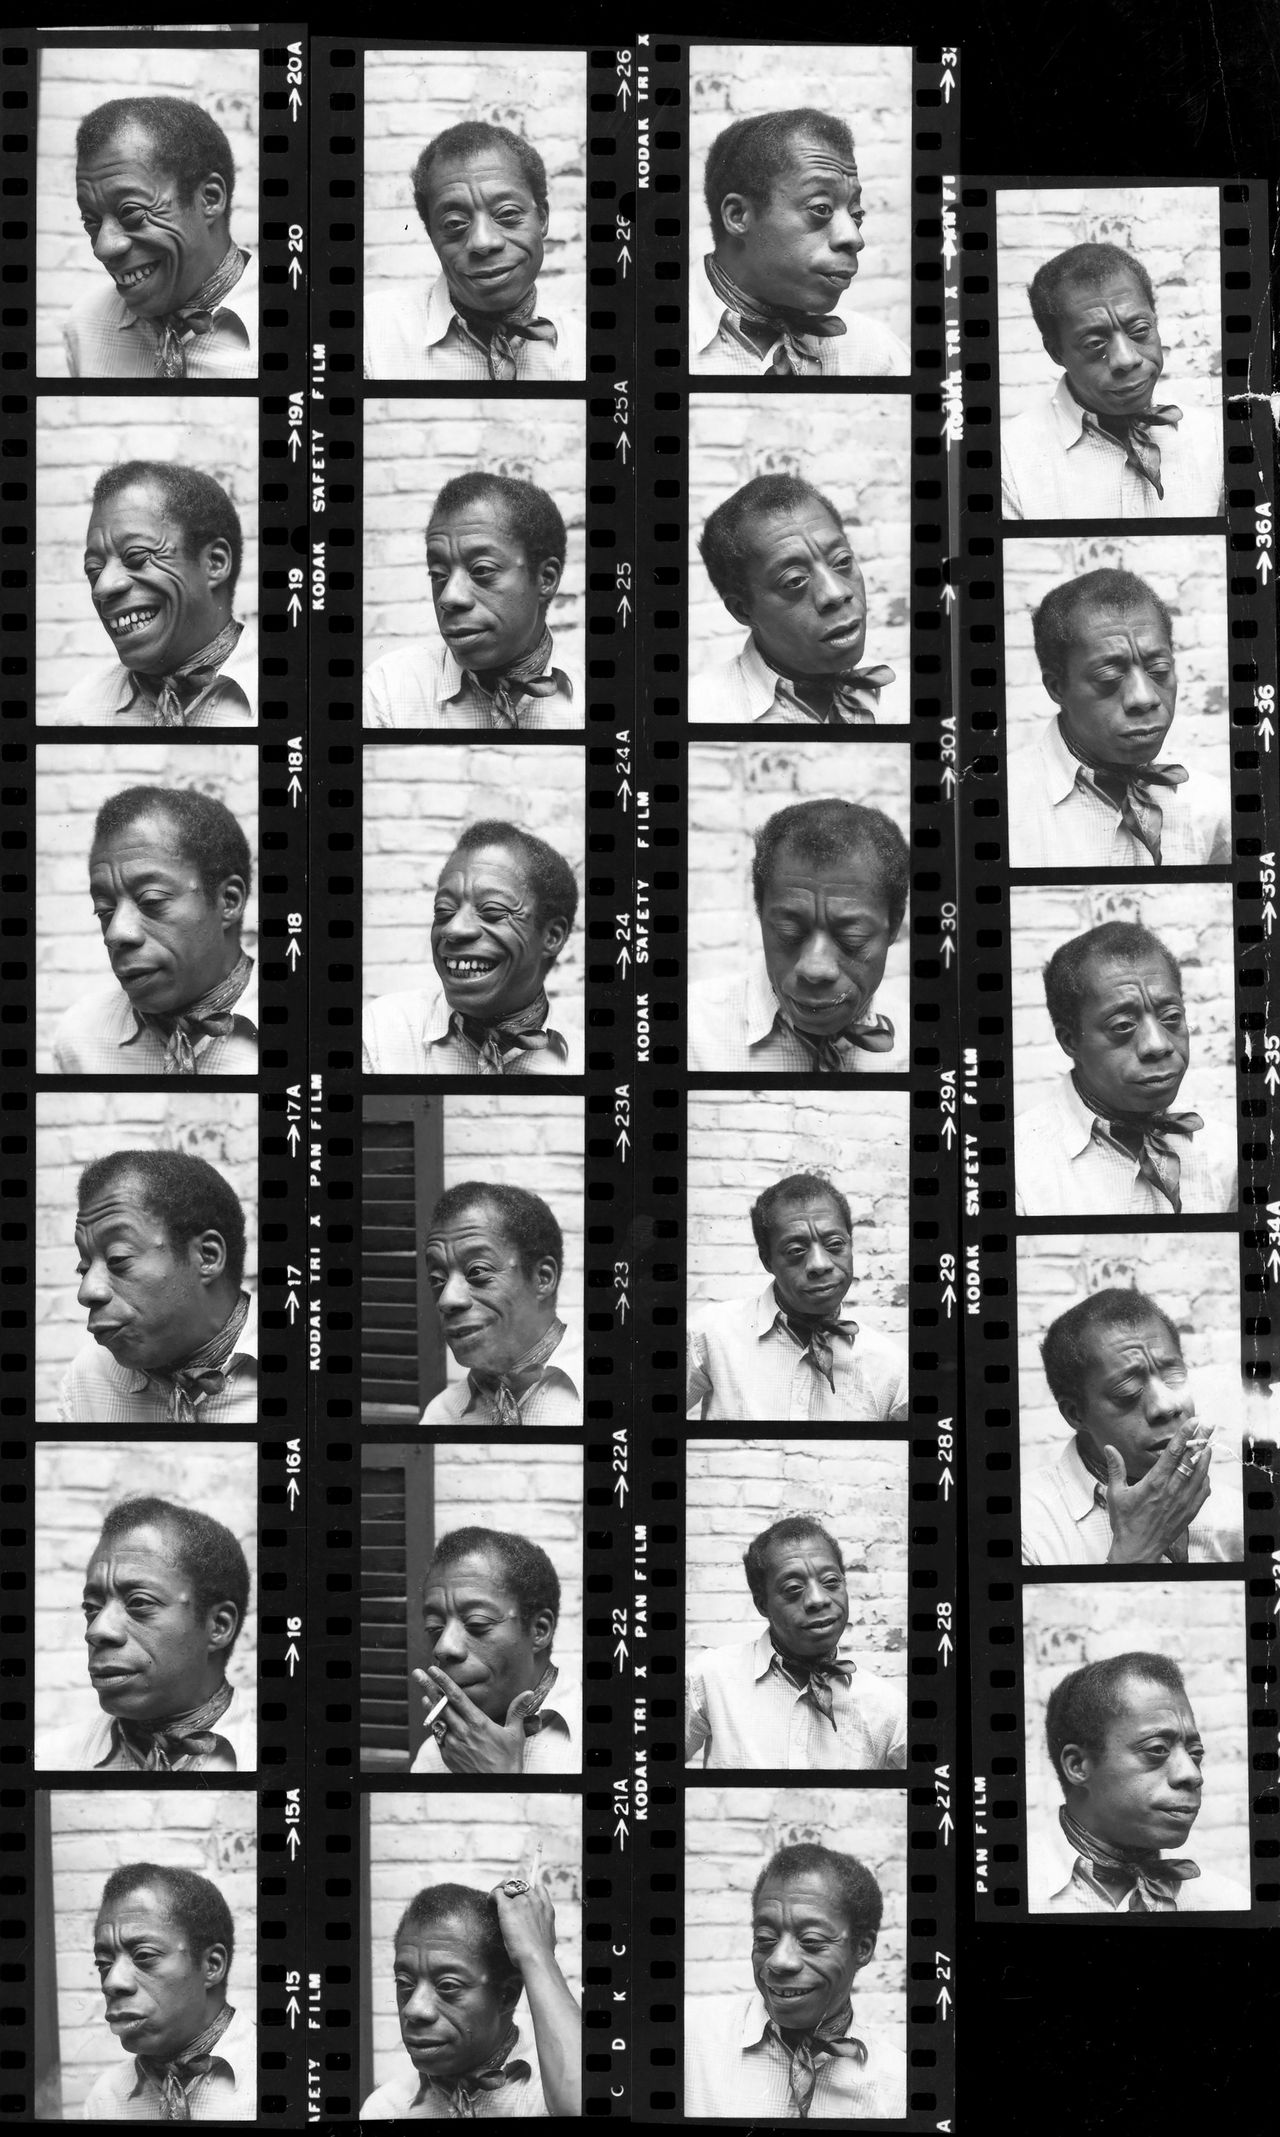 1972: James Baldwin posed for photographs in an apartment on the Upper West Side of Manhattan. Frame 19 was the image that editors chose for publication.